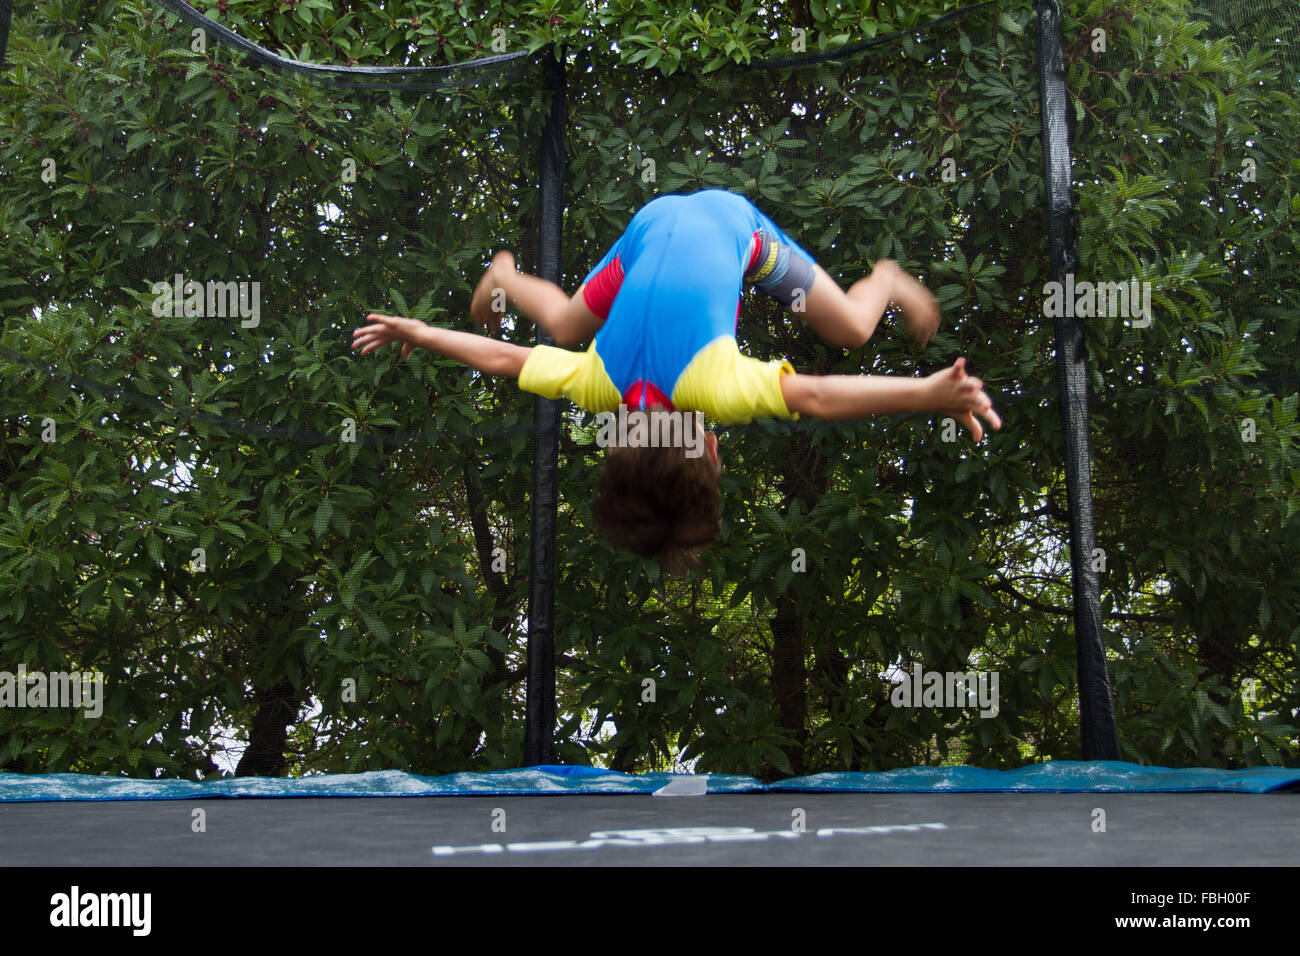 Young boy doing somersault on a trampoline. Stock Photo